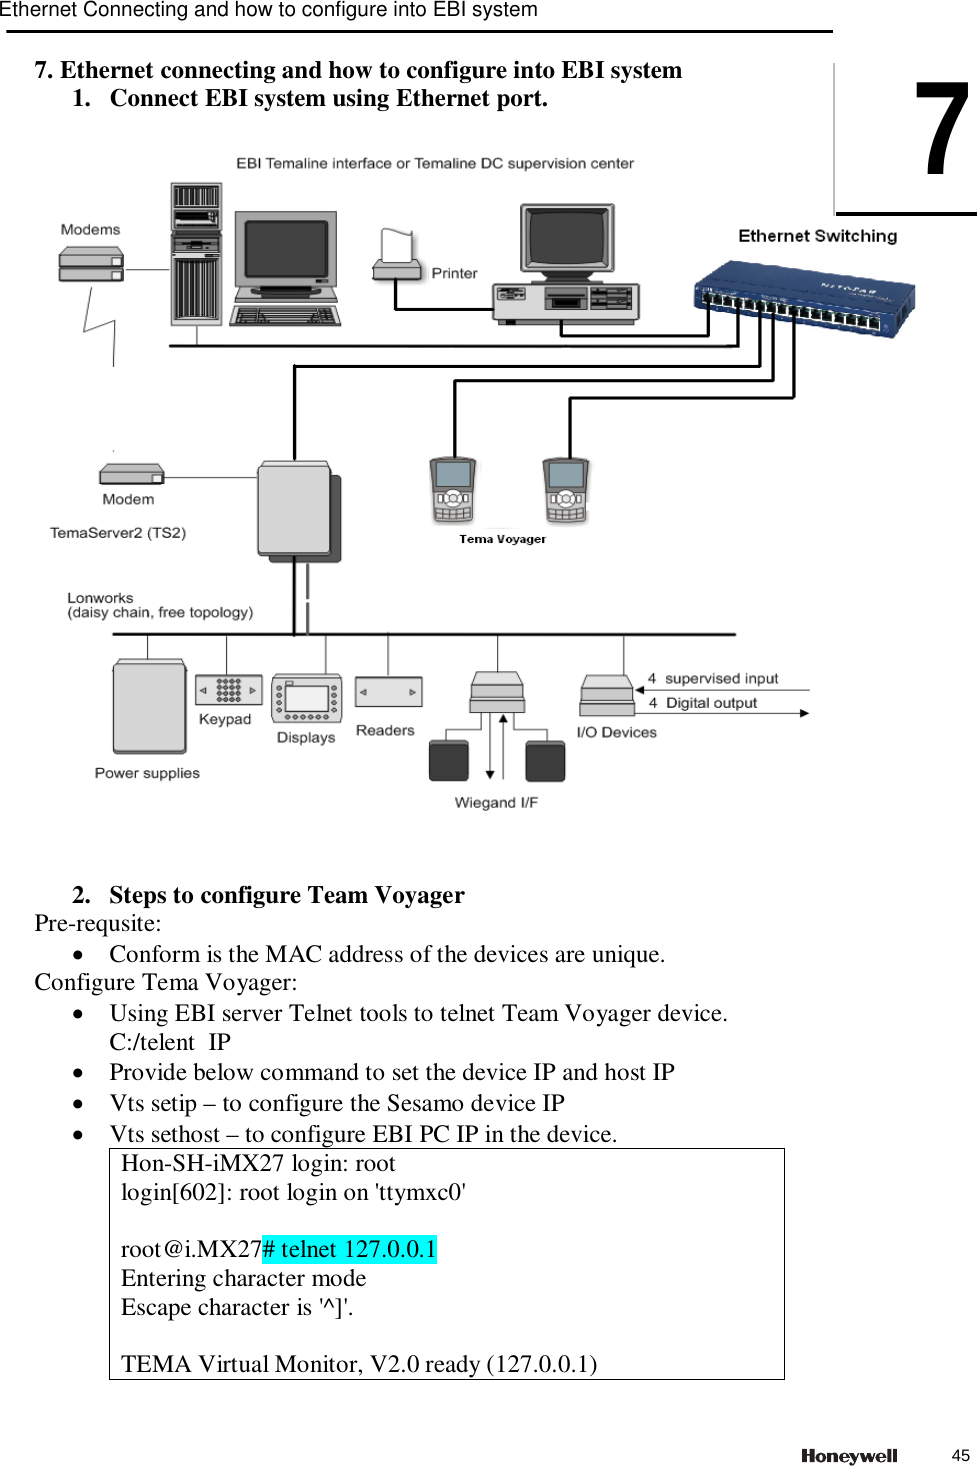 7. Ethernet connecting and how to configure into EBI system 1. Connect EBI system using Ethernet port.      2. Steps to configure Team Voyager Pre-requsite:  Conform is the MAC address of the devices are unique. Configure Tema Voyager:  Using EBI server Telnet tools to telnet Team Voyager device.  C:/telent  IP  Provide below command to set the device IP and host IP  Vts setip – to configure the Sesamo device IP  Vts sethost – to configure EBI PC IP in the device. Hon-SH-iMX27 login: root login[602]: root login on &apos;ttymxc0&apos;  root@i.MX27# telnet 127.0.0.1 Entering character mode Escape character is &apos;^]&apos;.  TEMA Virtual Monitor, V2.0 ready (127.0.0.1) Ethernet Connecting and how to configure into EBI system745